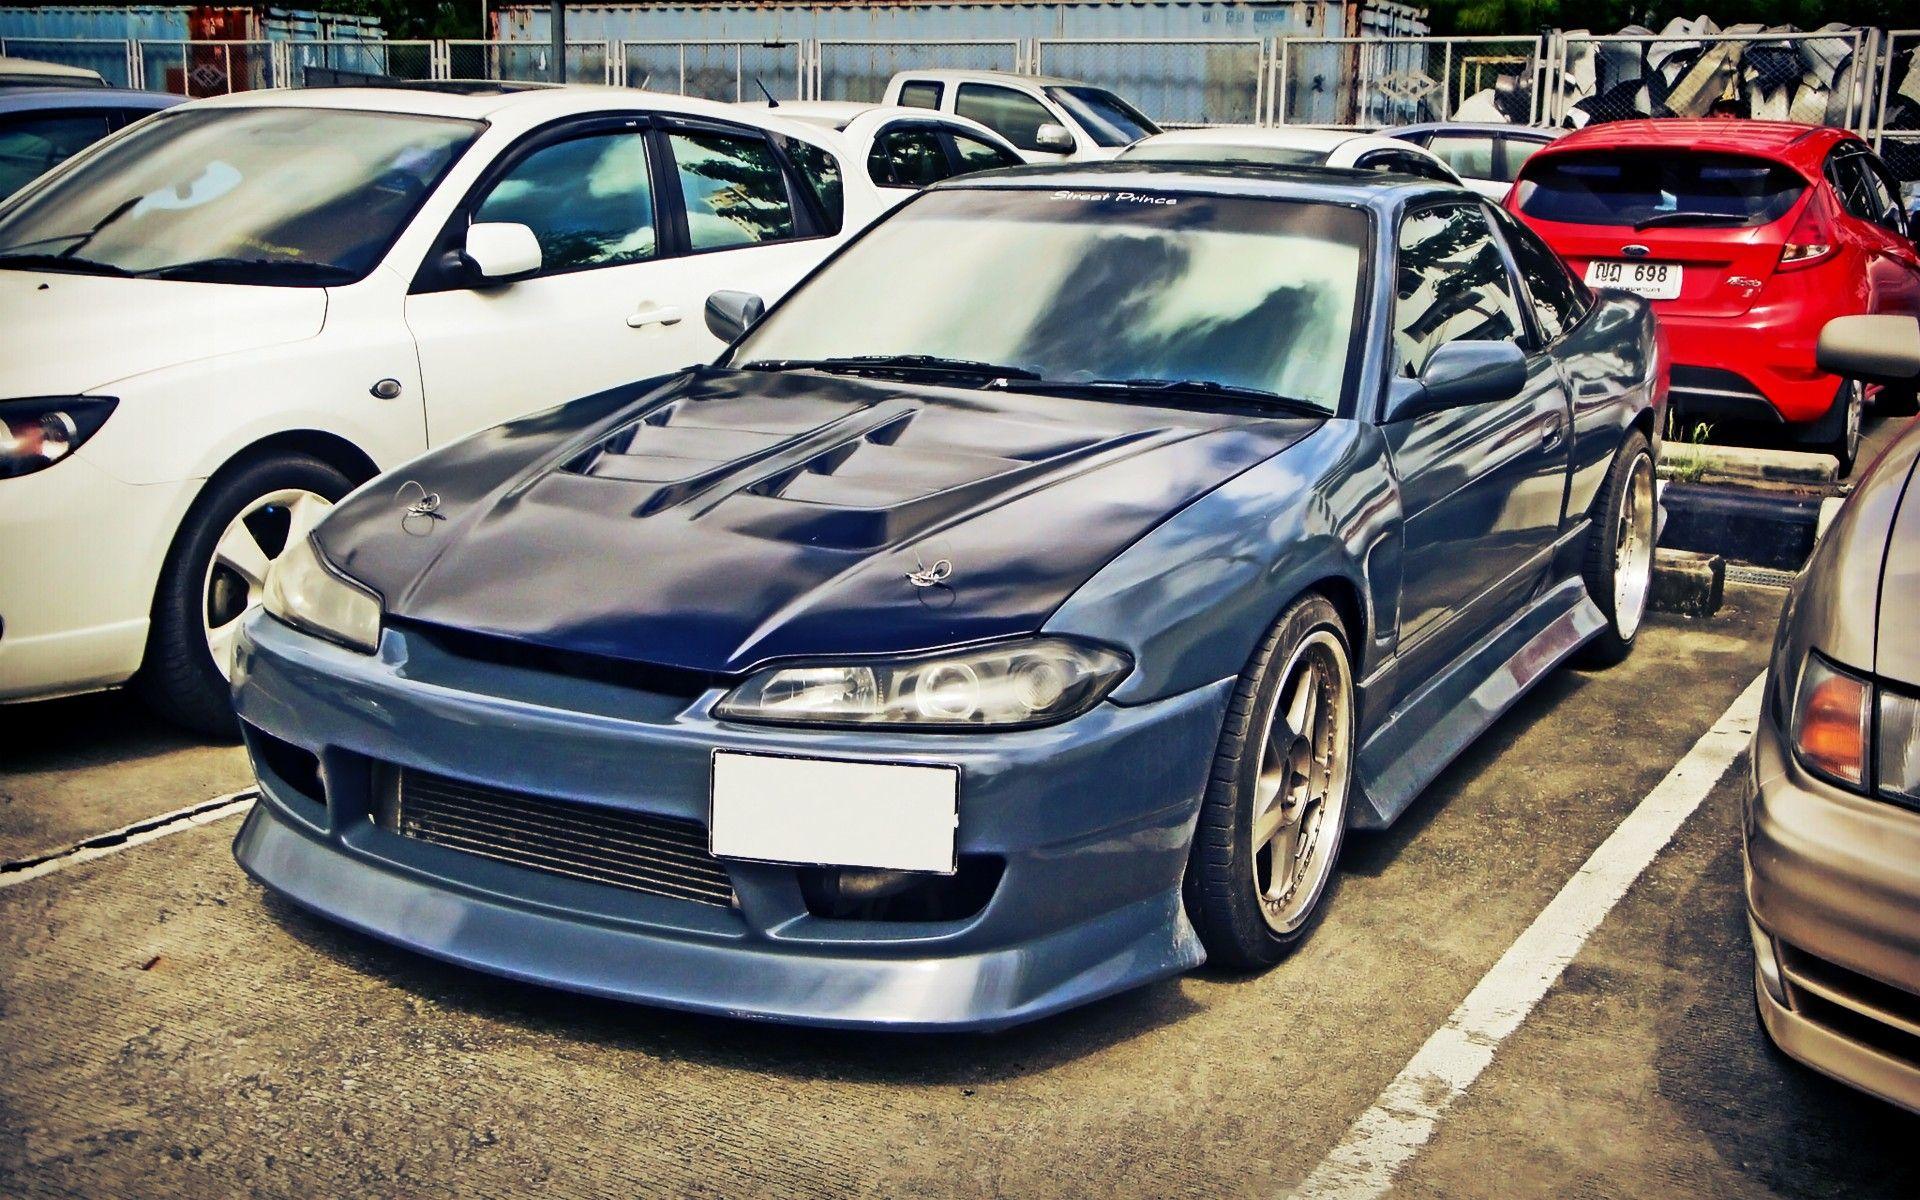 Cars tuning HDR photography Nissan Silvia S15 JDM Japanese domestic